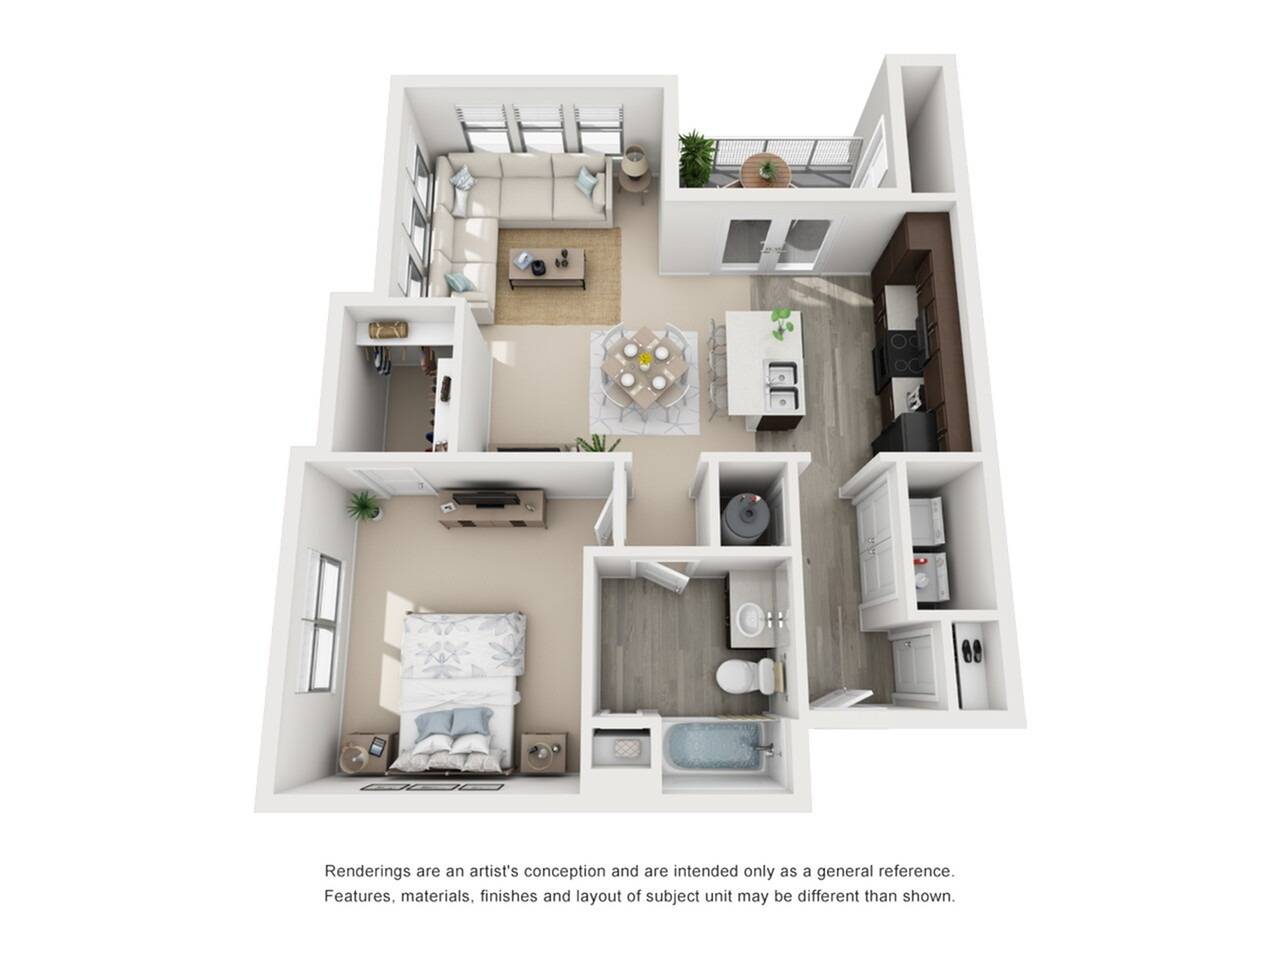 A2 Renovated Floor Plan